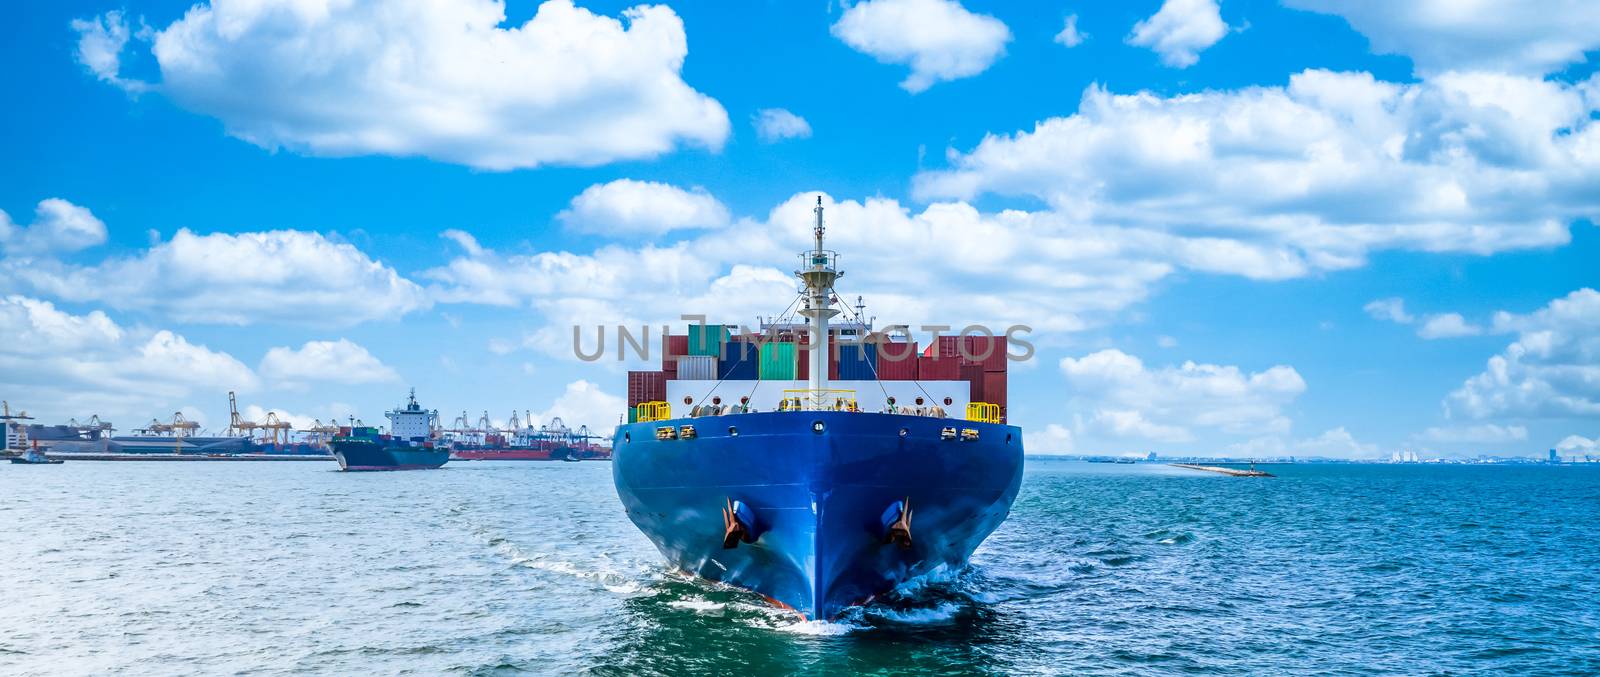 Container cargo ship in ocean, Business industry commerce global by AvigatoR